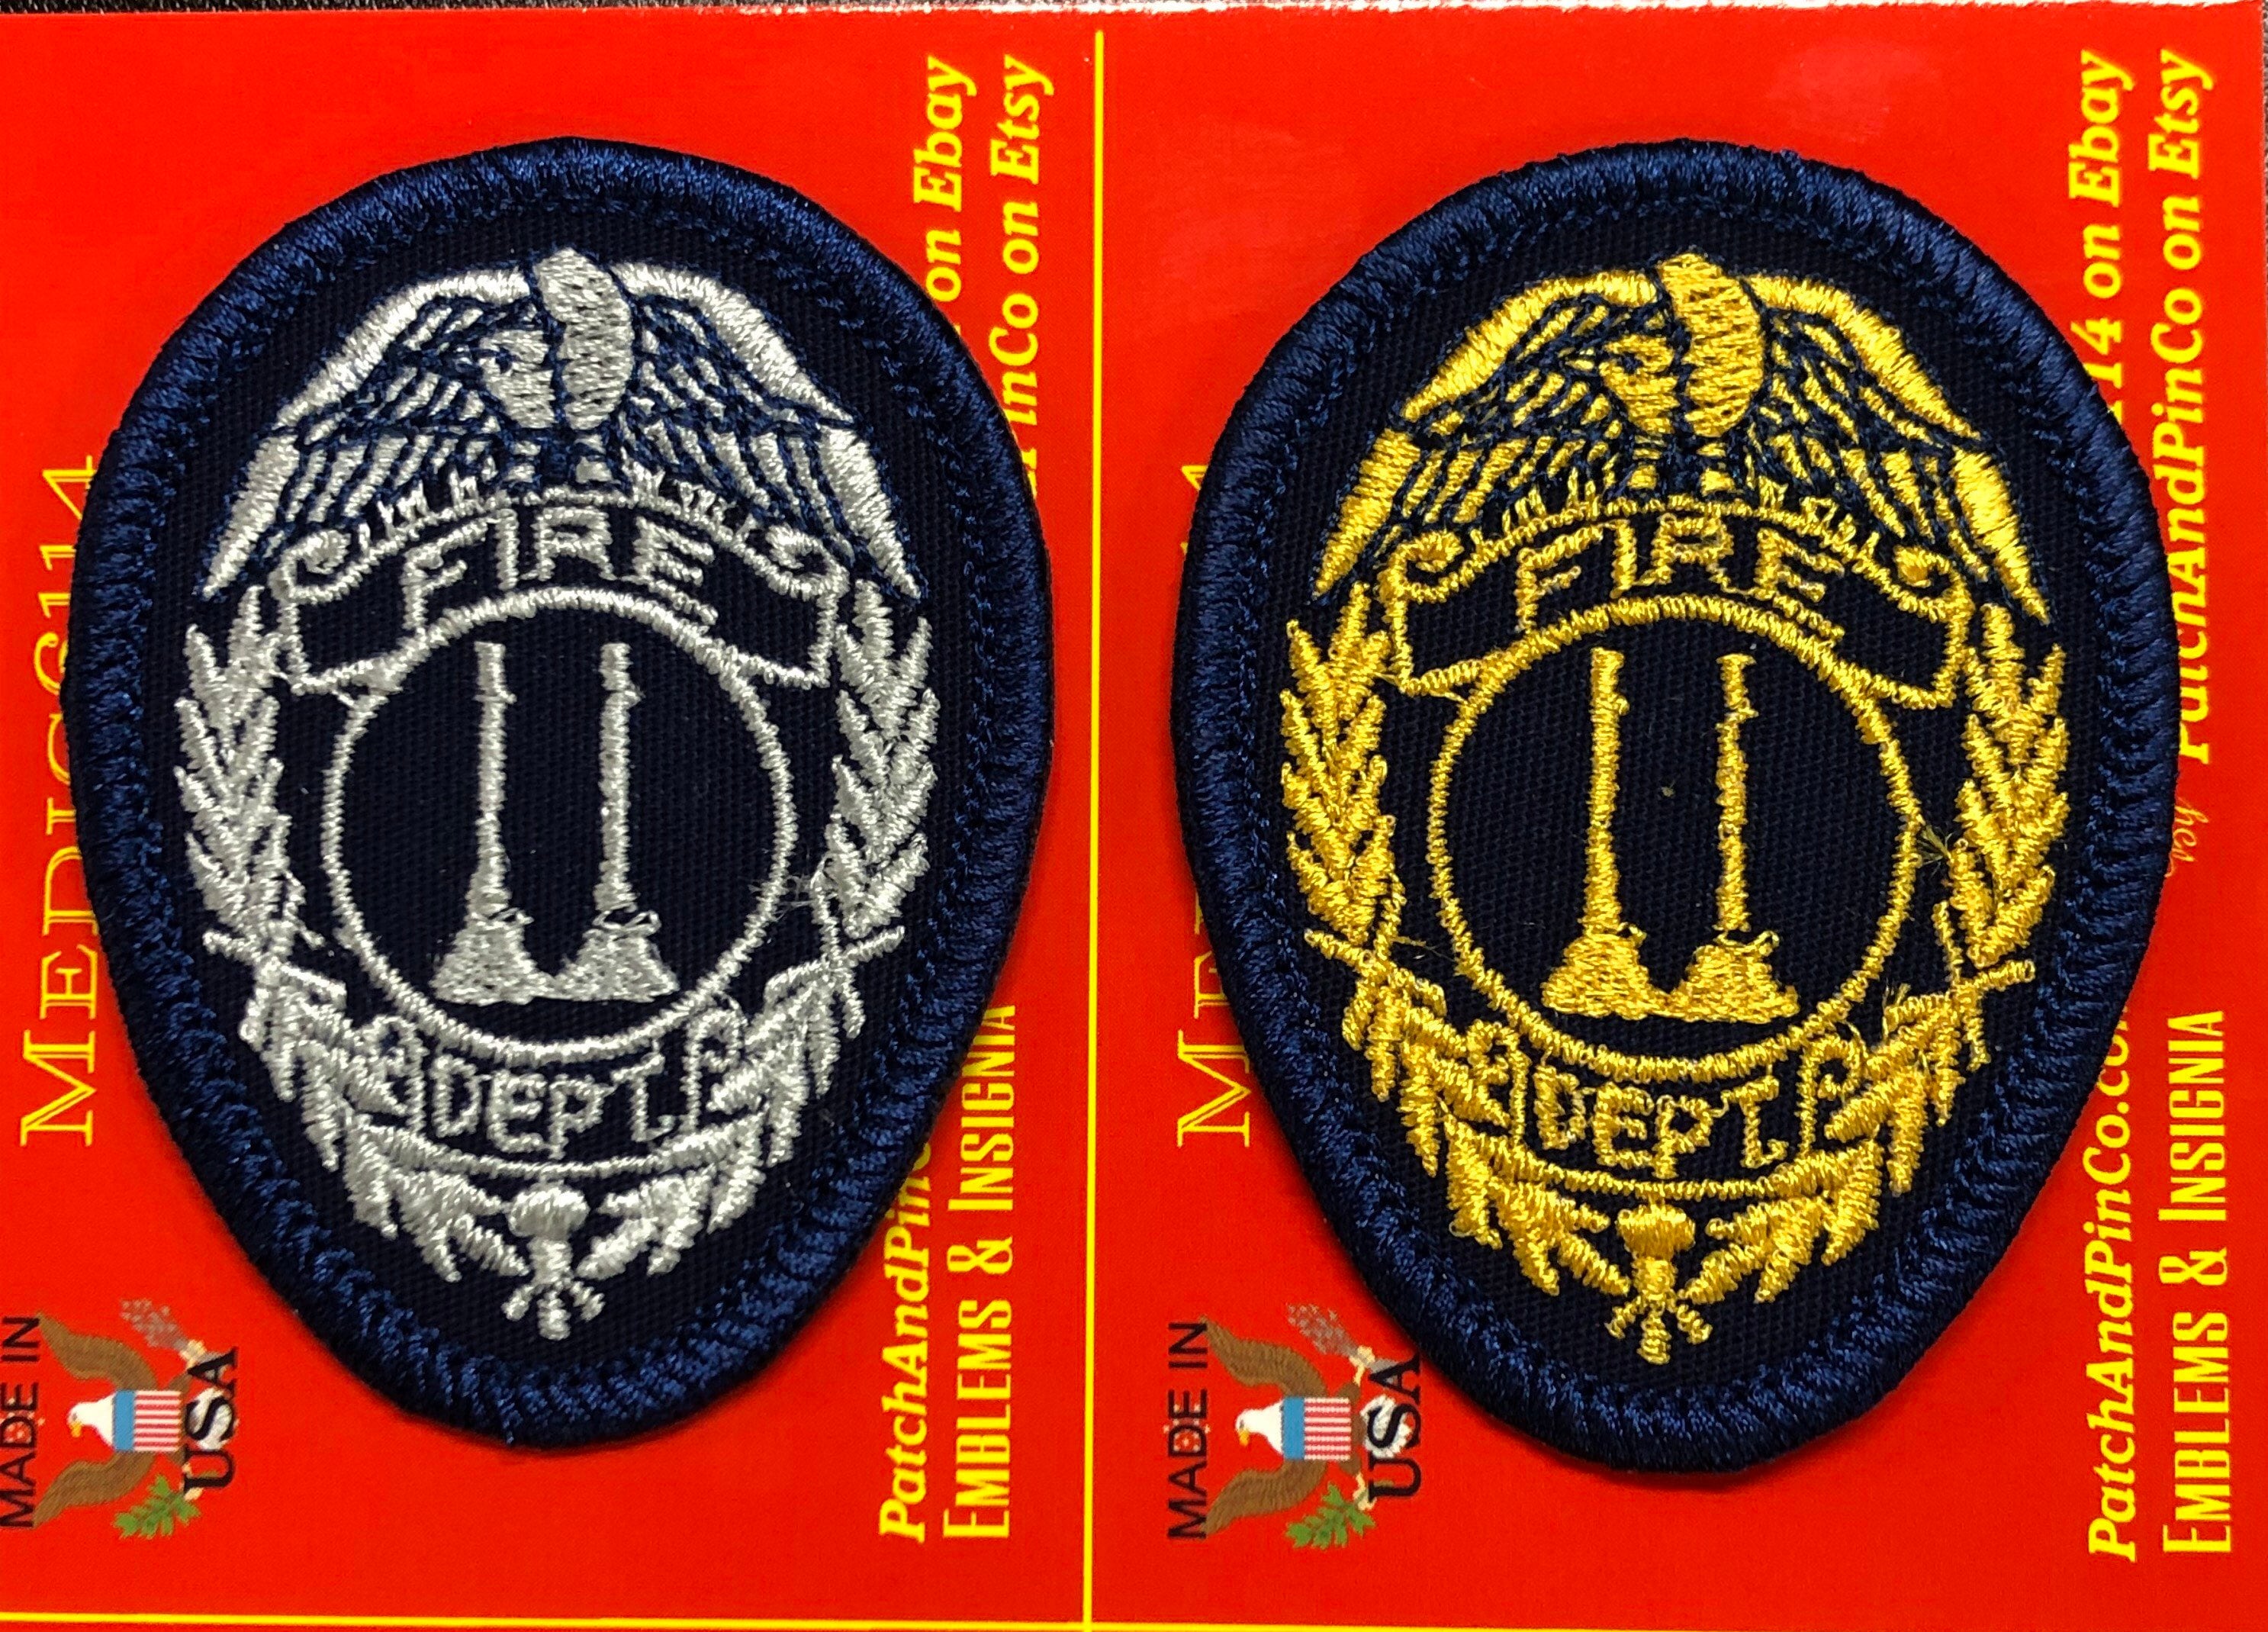 5 FR Patches Tags 1.75 Fire Resistant Retardant FRC White Iron on Patch 